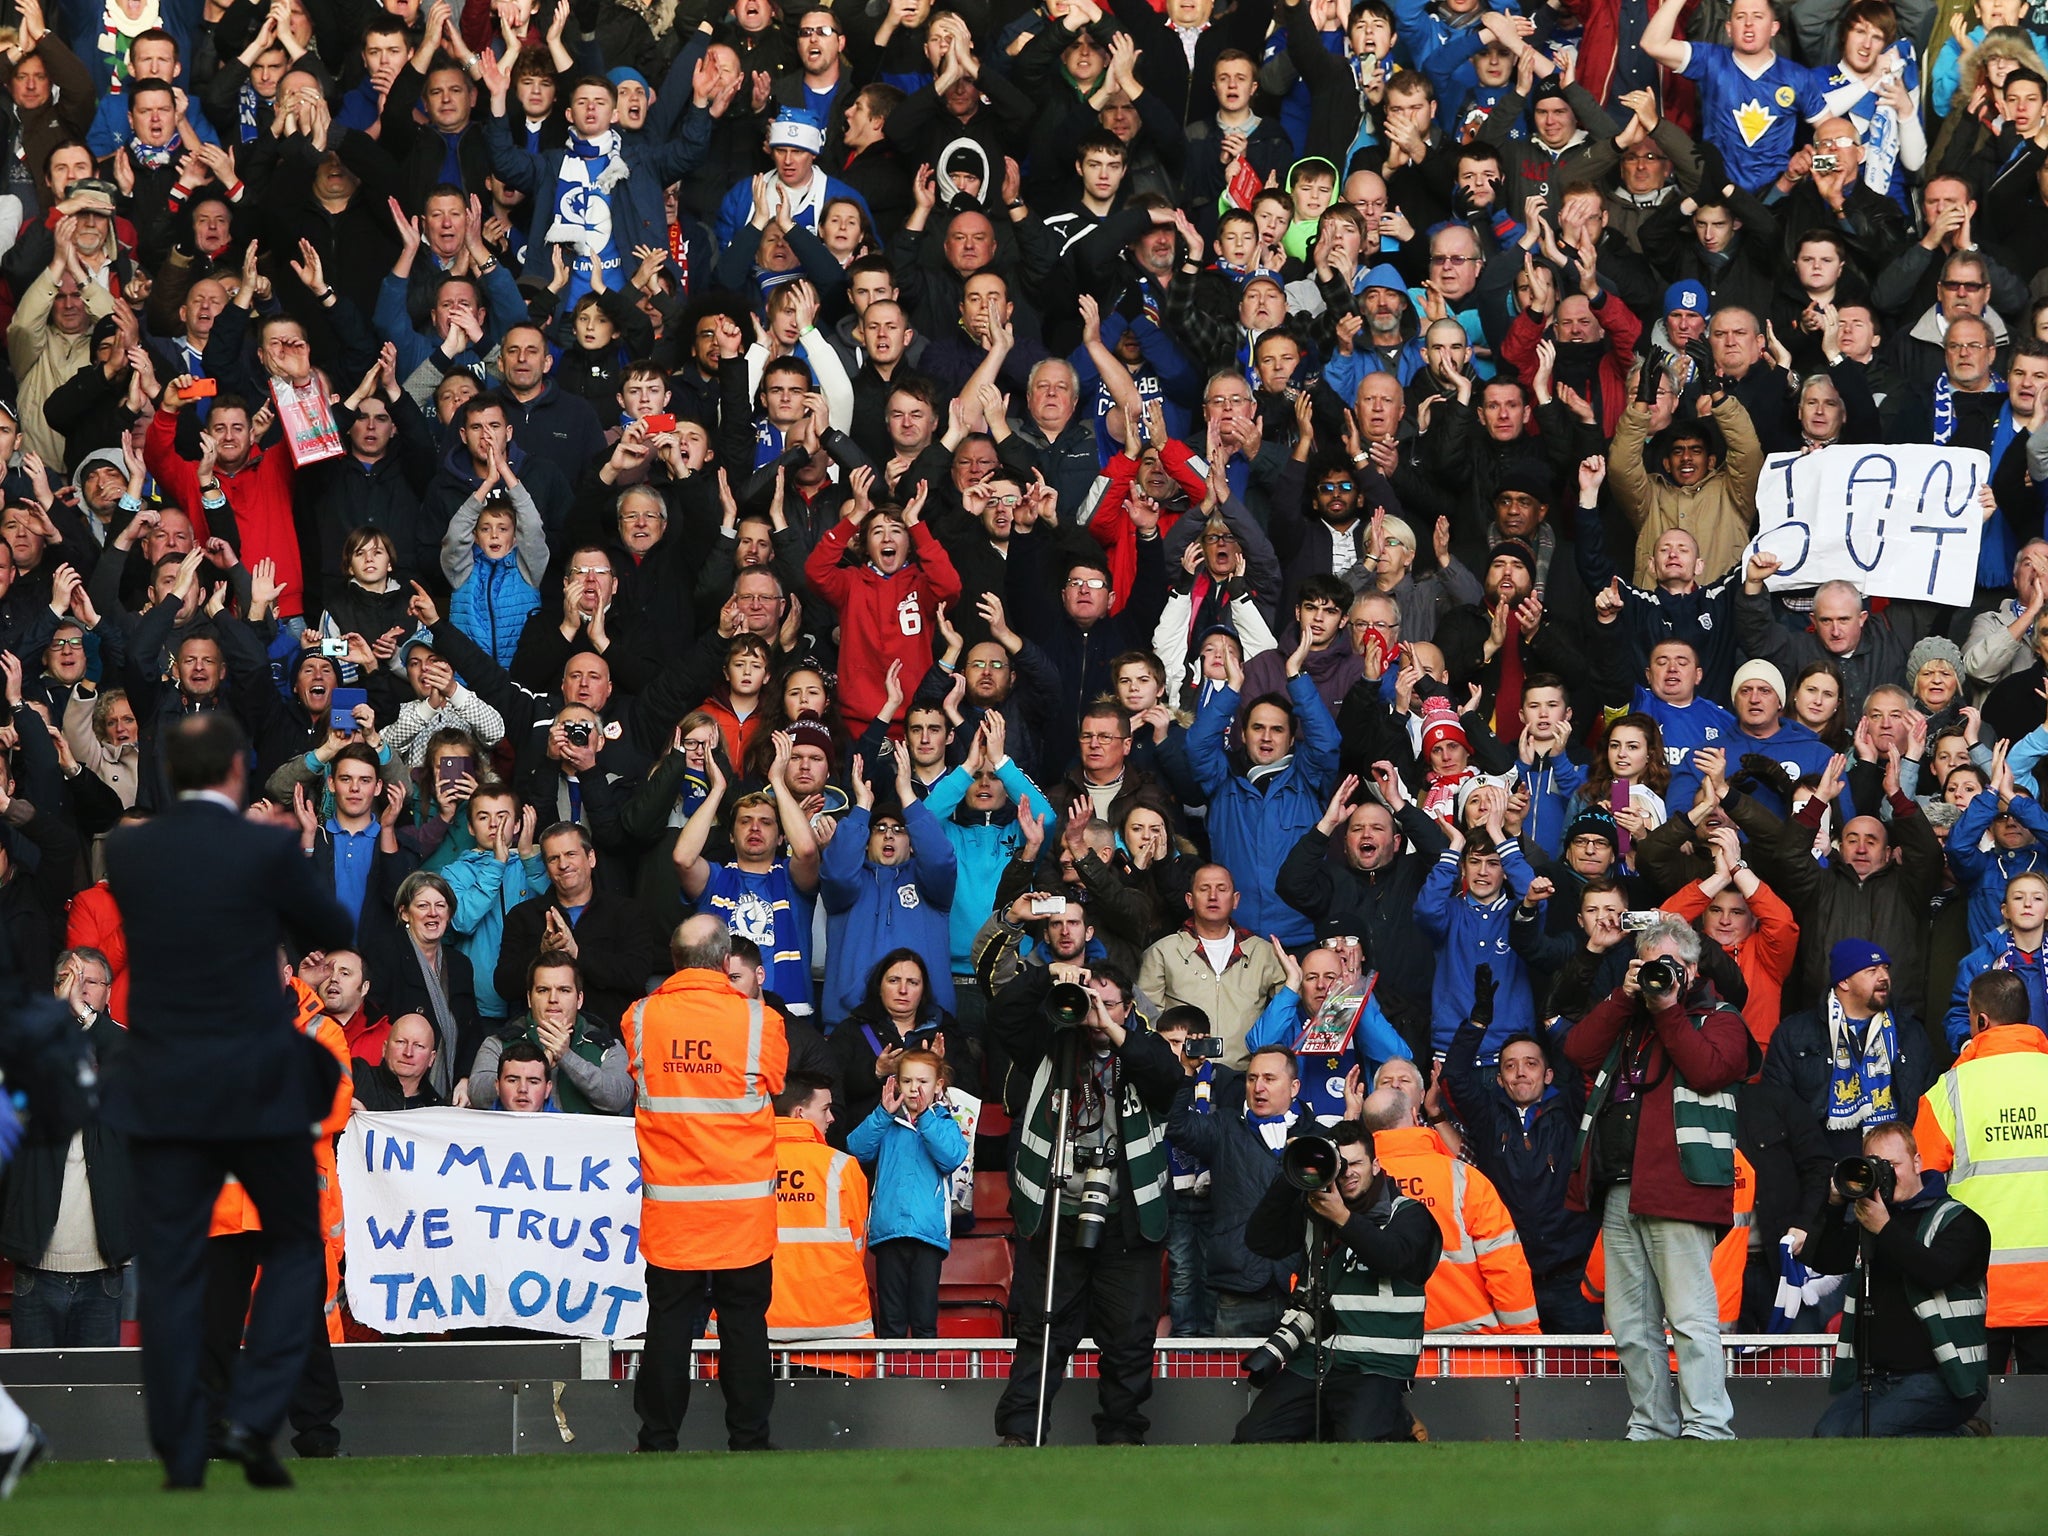 Malky Mackay applauds the Cardiff City fans following the 3-1 loss to Liverpool